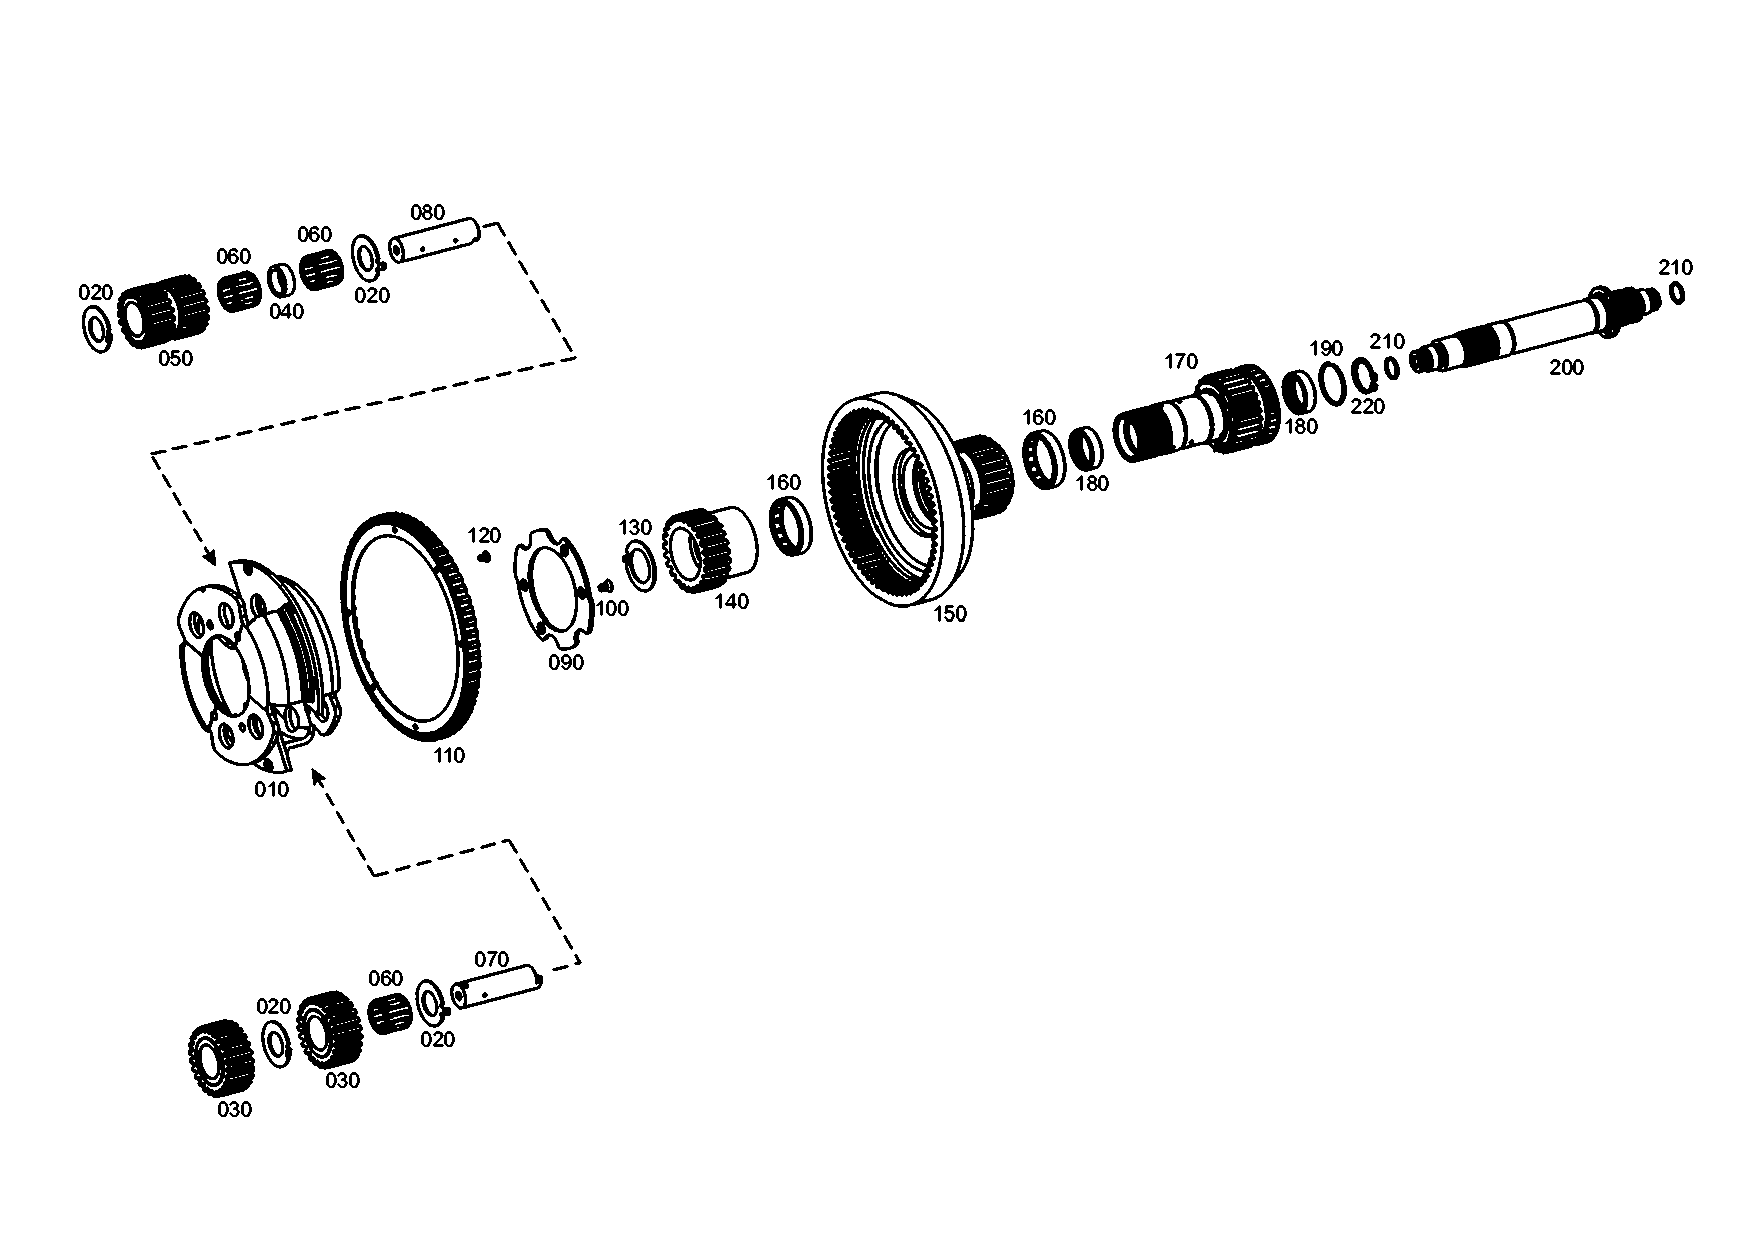 drawing for E. N. M. T. P. / CPG 192300220052 - PRESSURE DISK (figure 3)